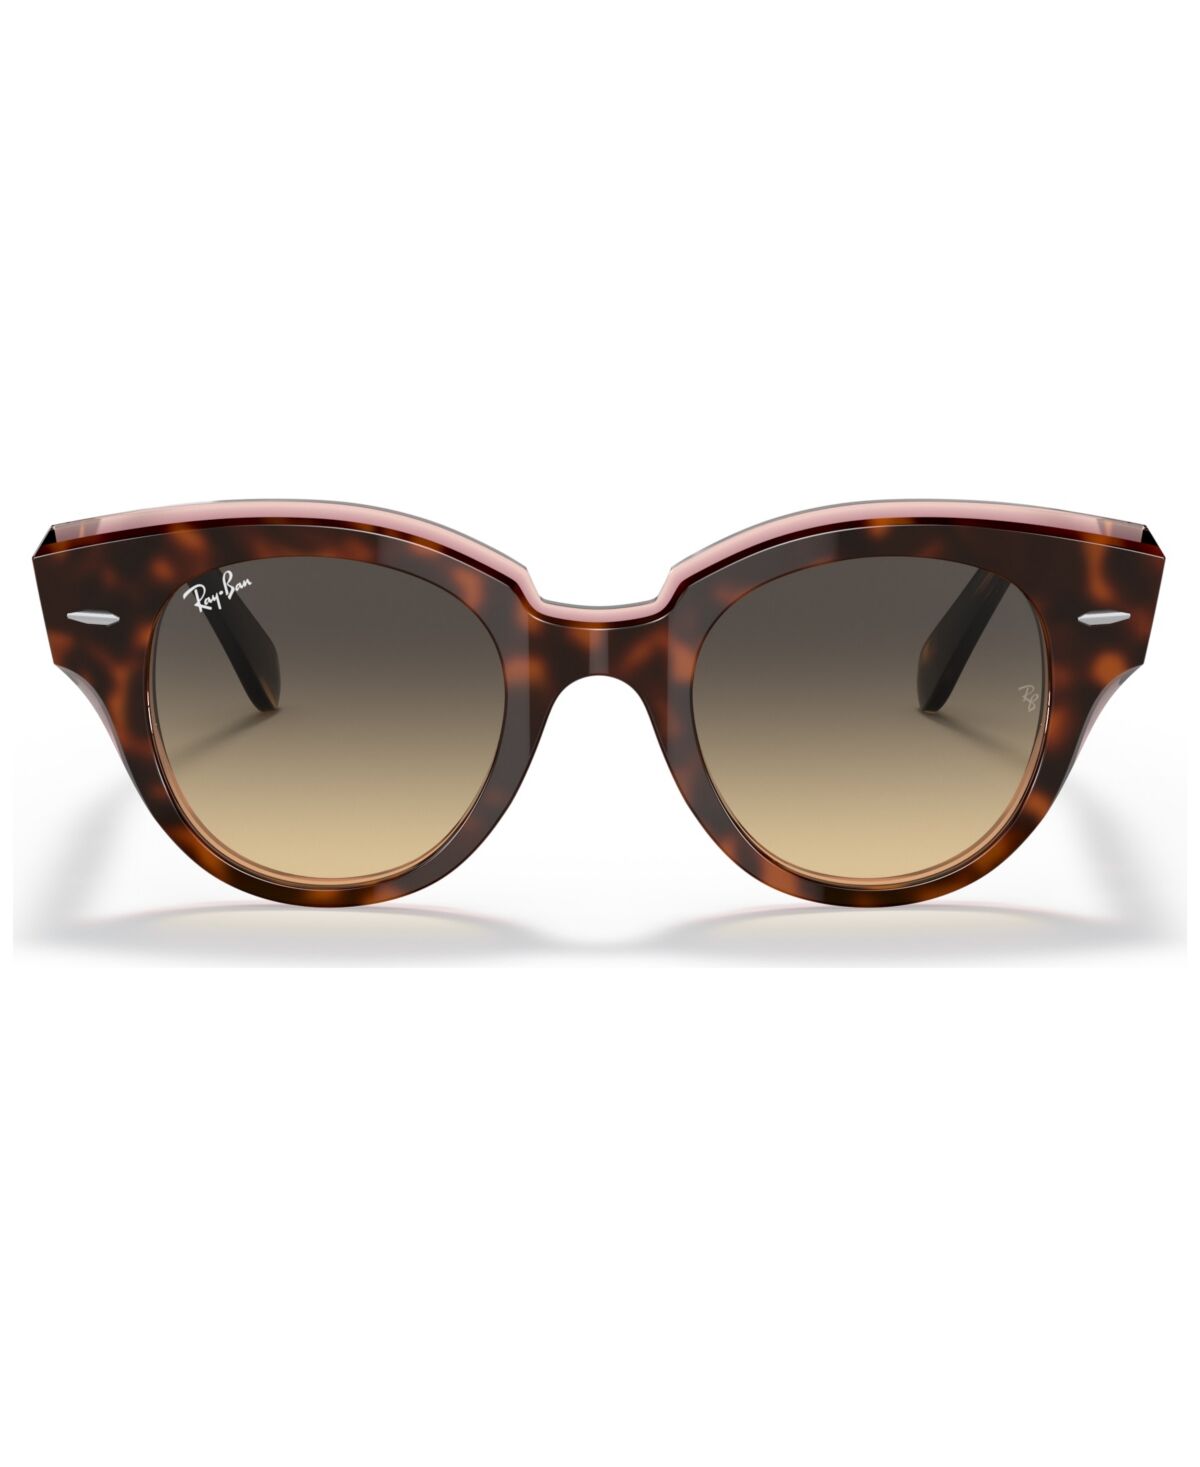 Ray-Ban Sunglasses, Roundabout RB2192 - HAVANA ON TRANSPARENT PINK/BROWN GRADIEN